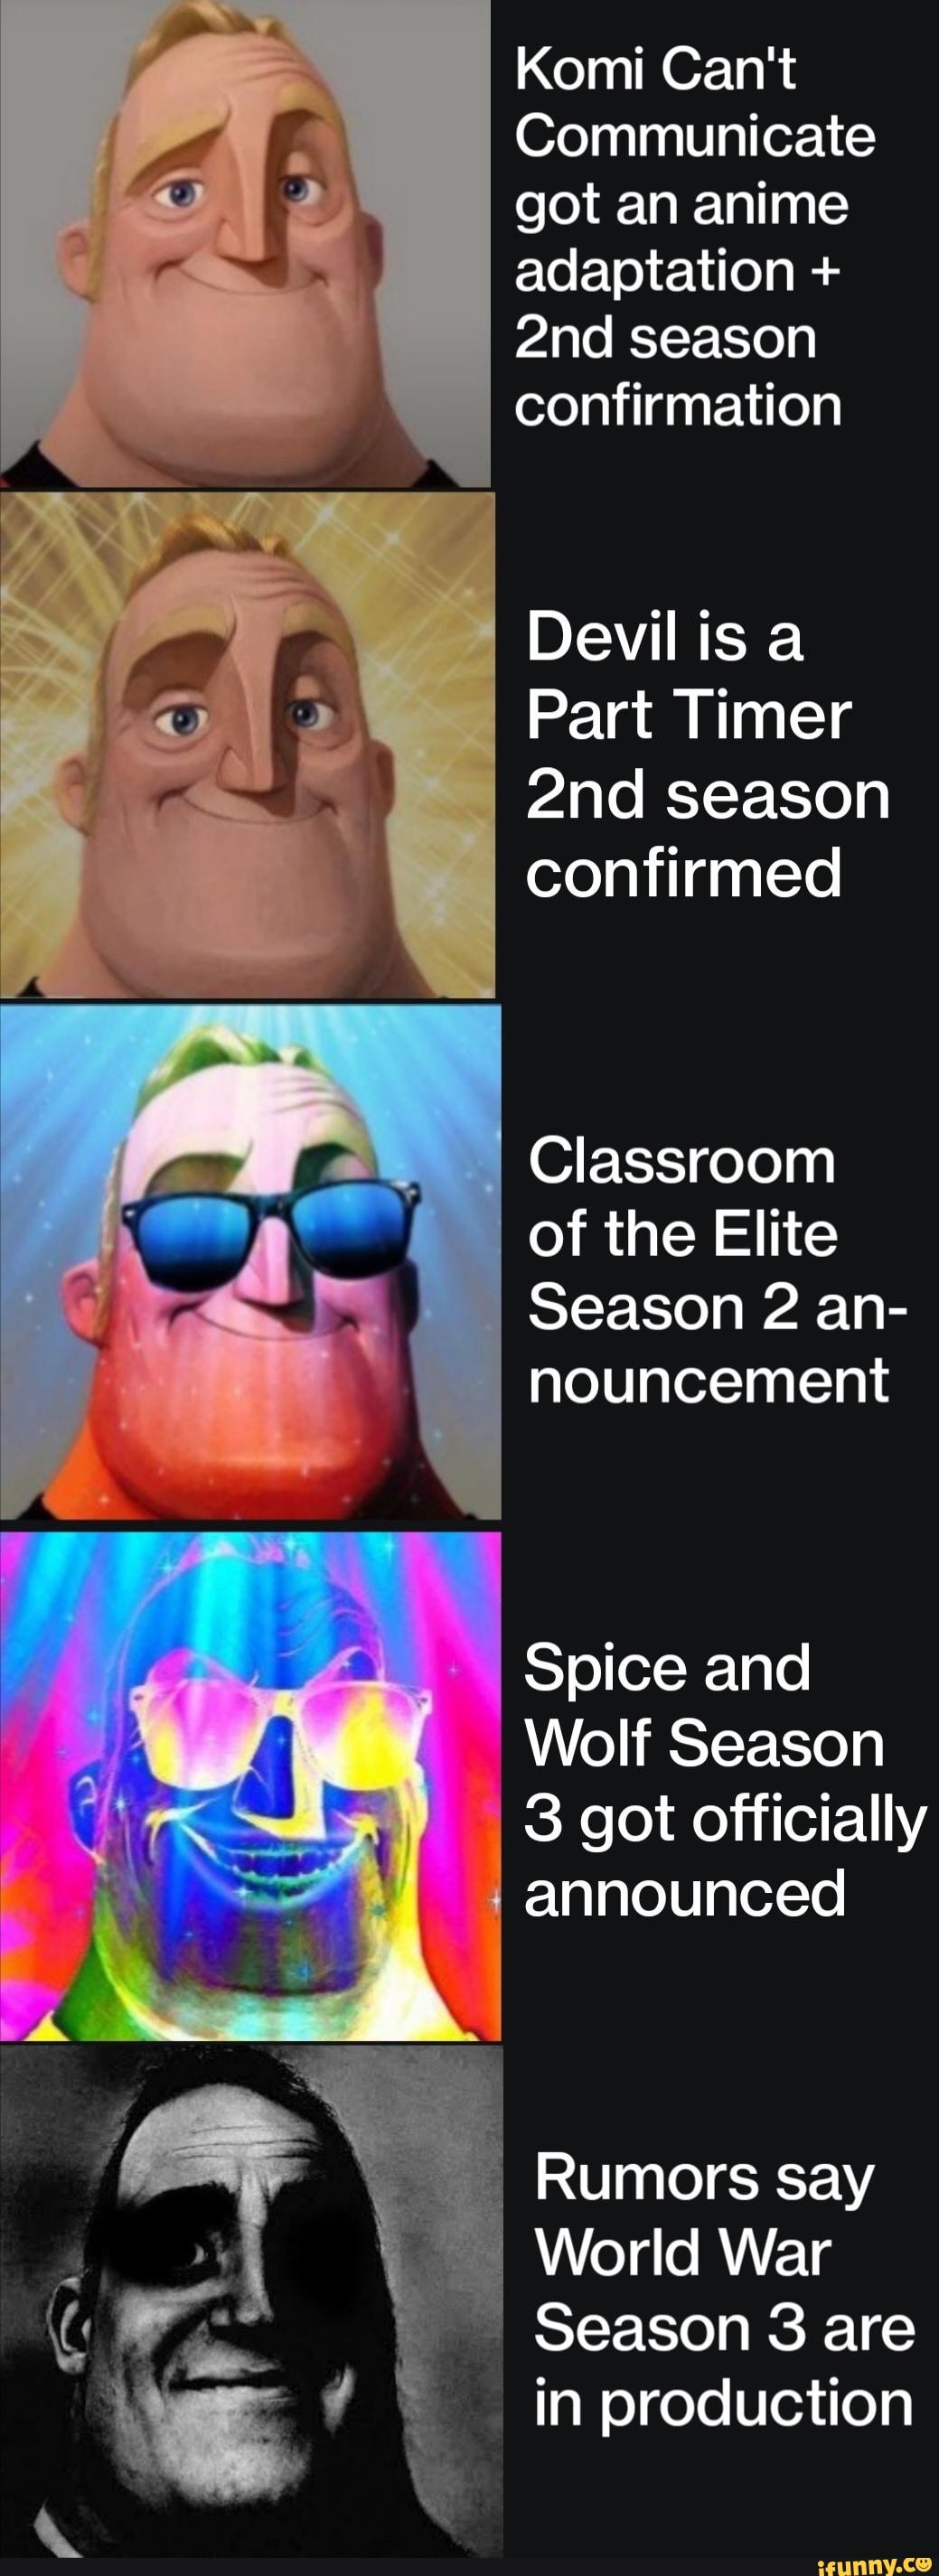 Classroom of the Elite Confirms Seasons 2 and 3!